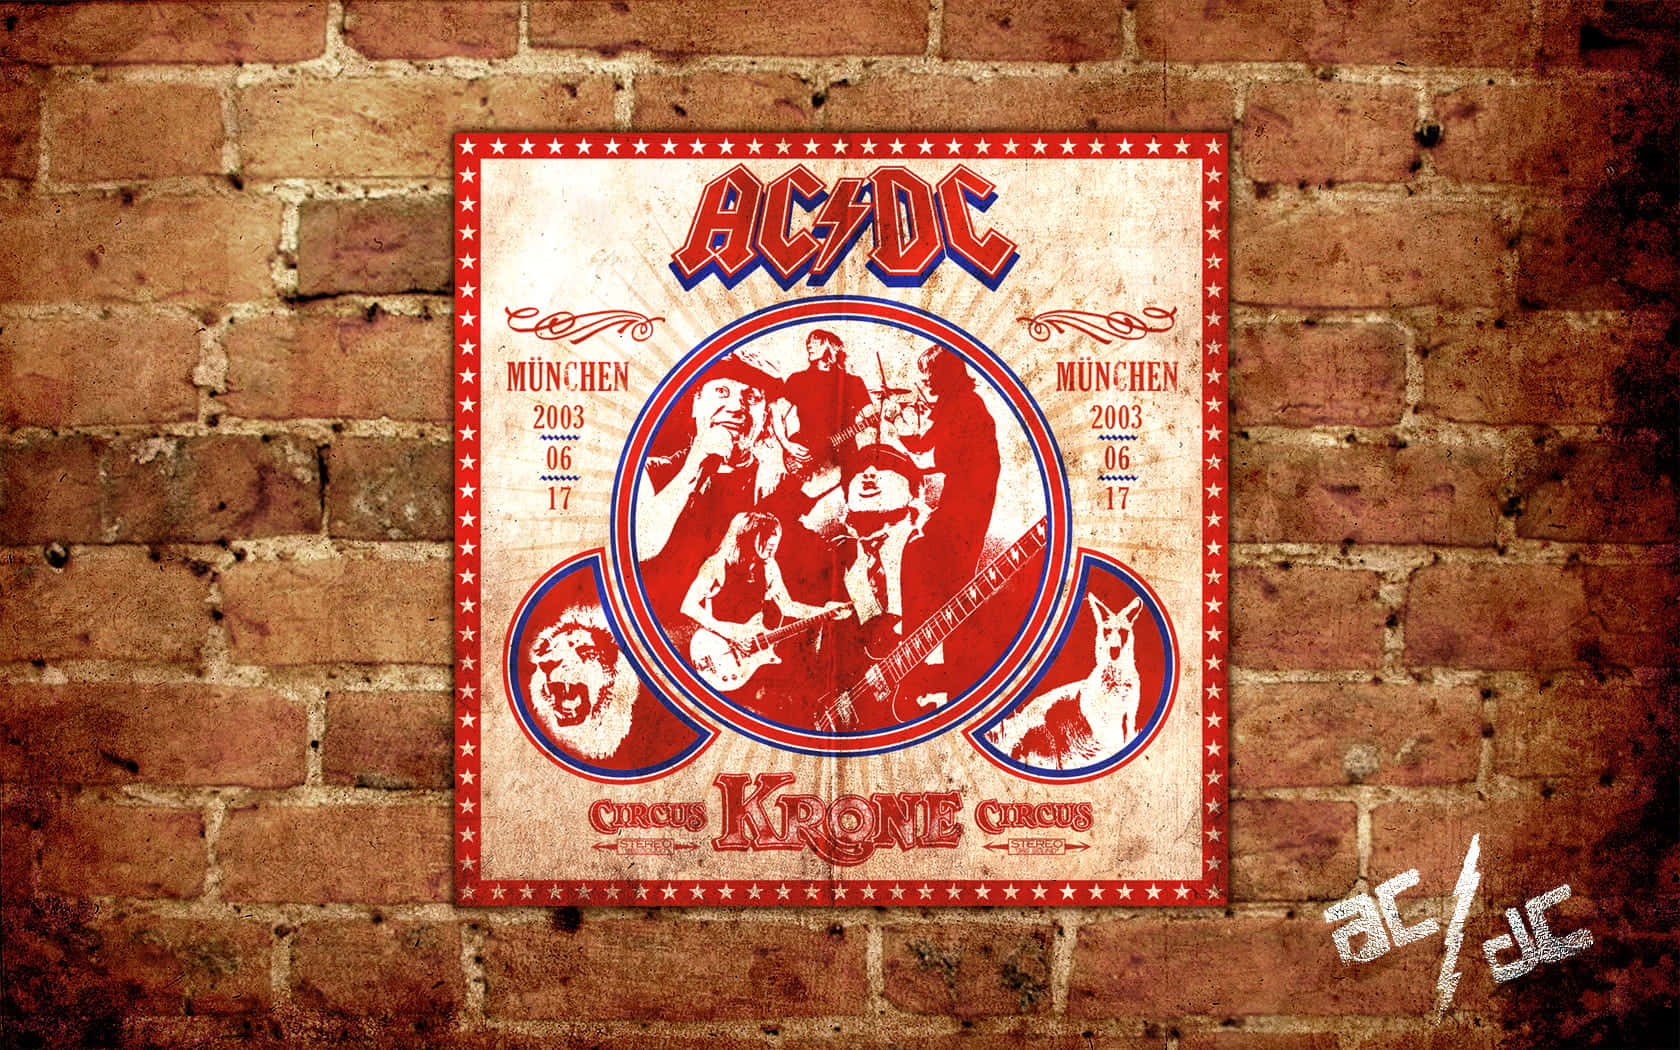 Legendary Rock Band Ac/dc In Concert Background